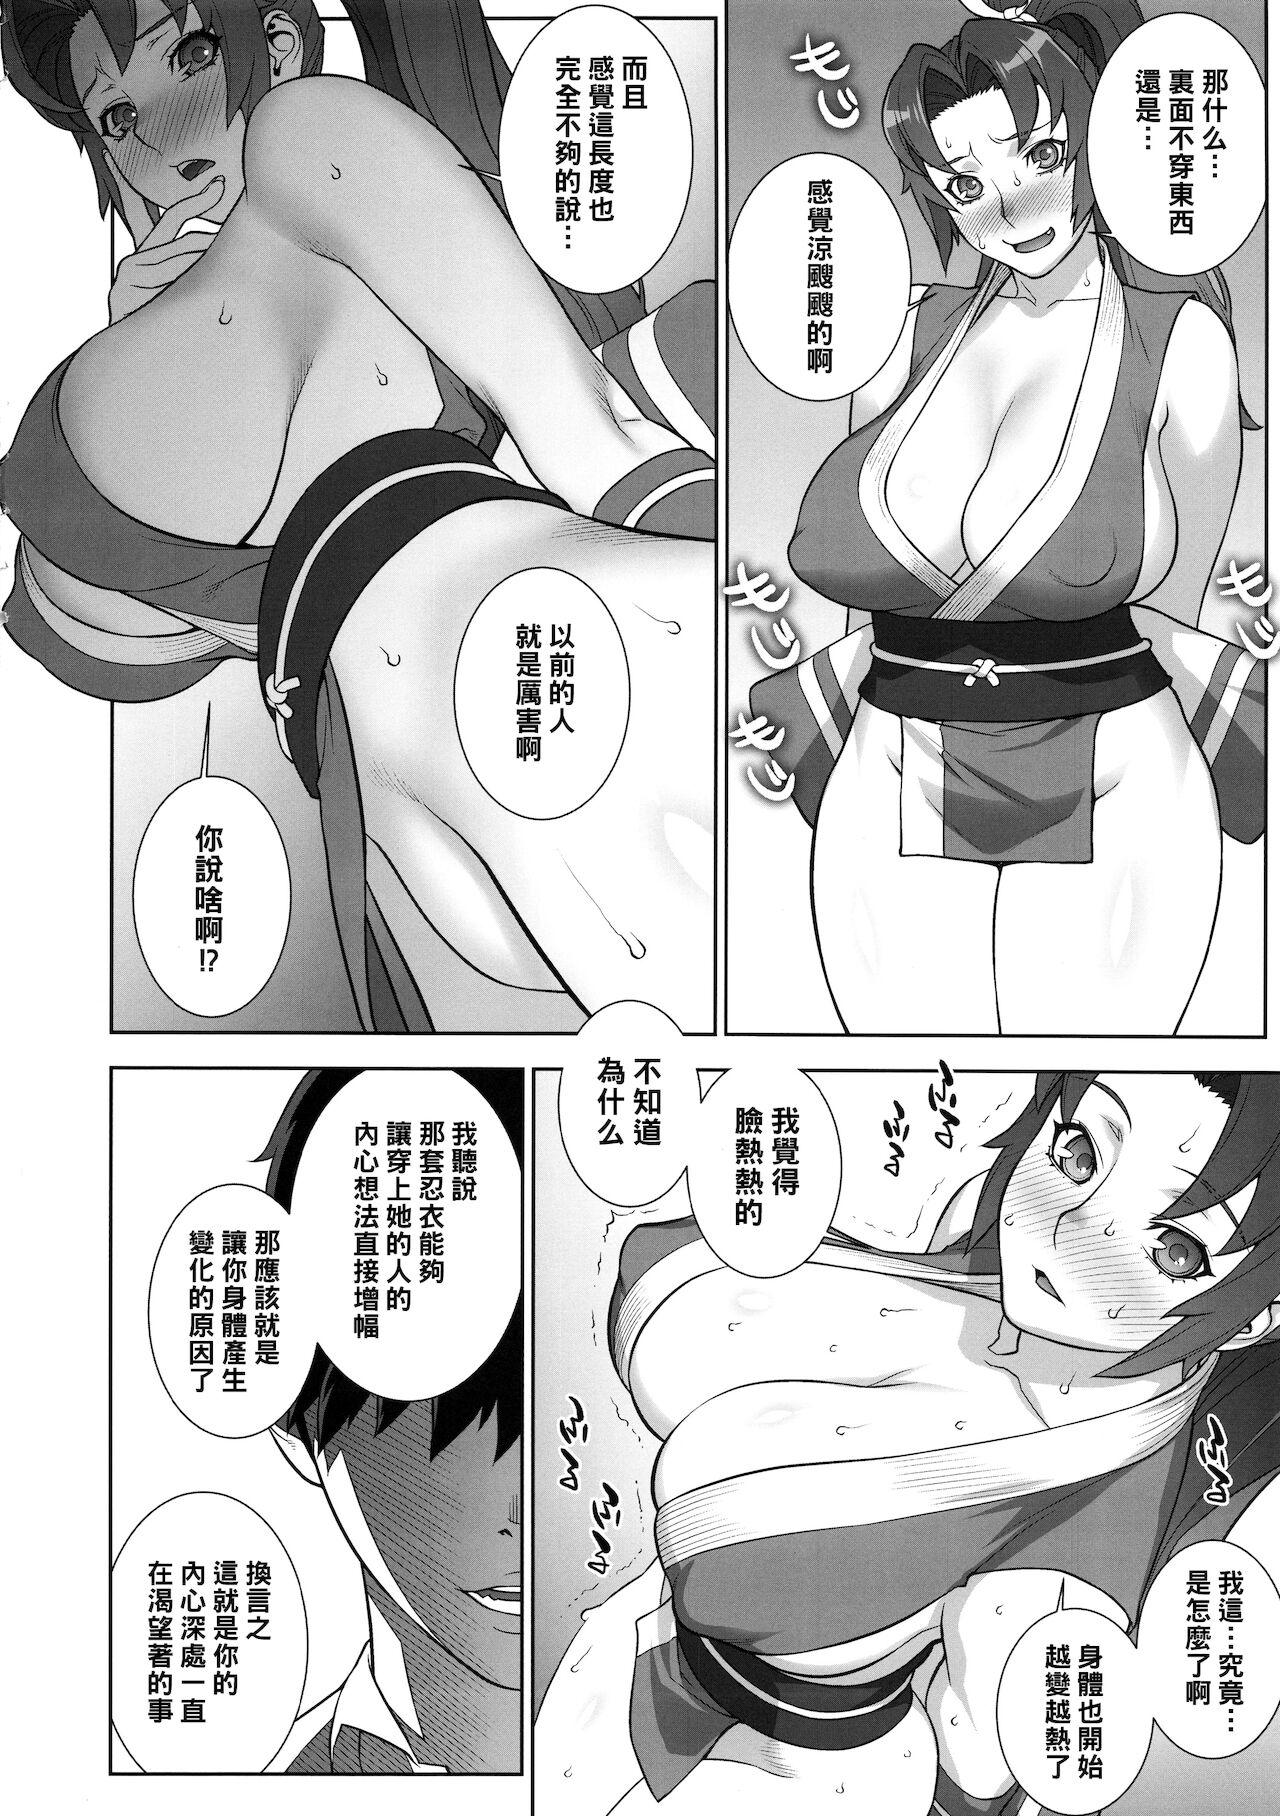 Hot Girl Domidare Kachousen - King of fighters Role Play - Page 7